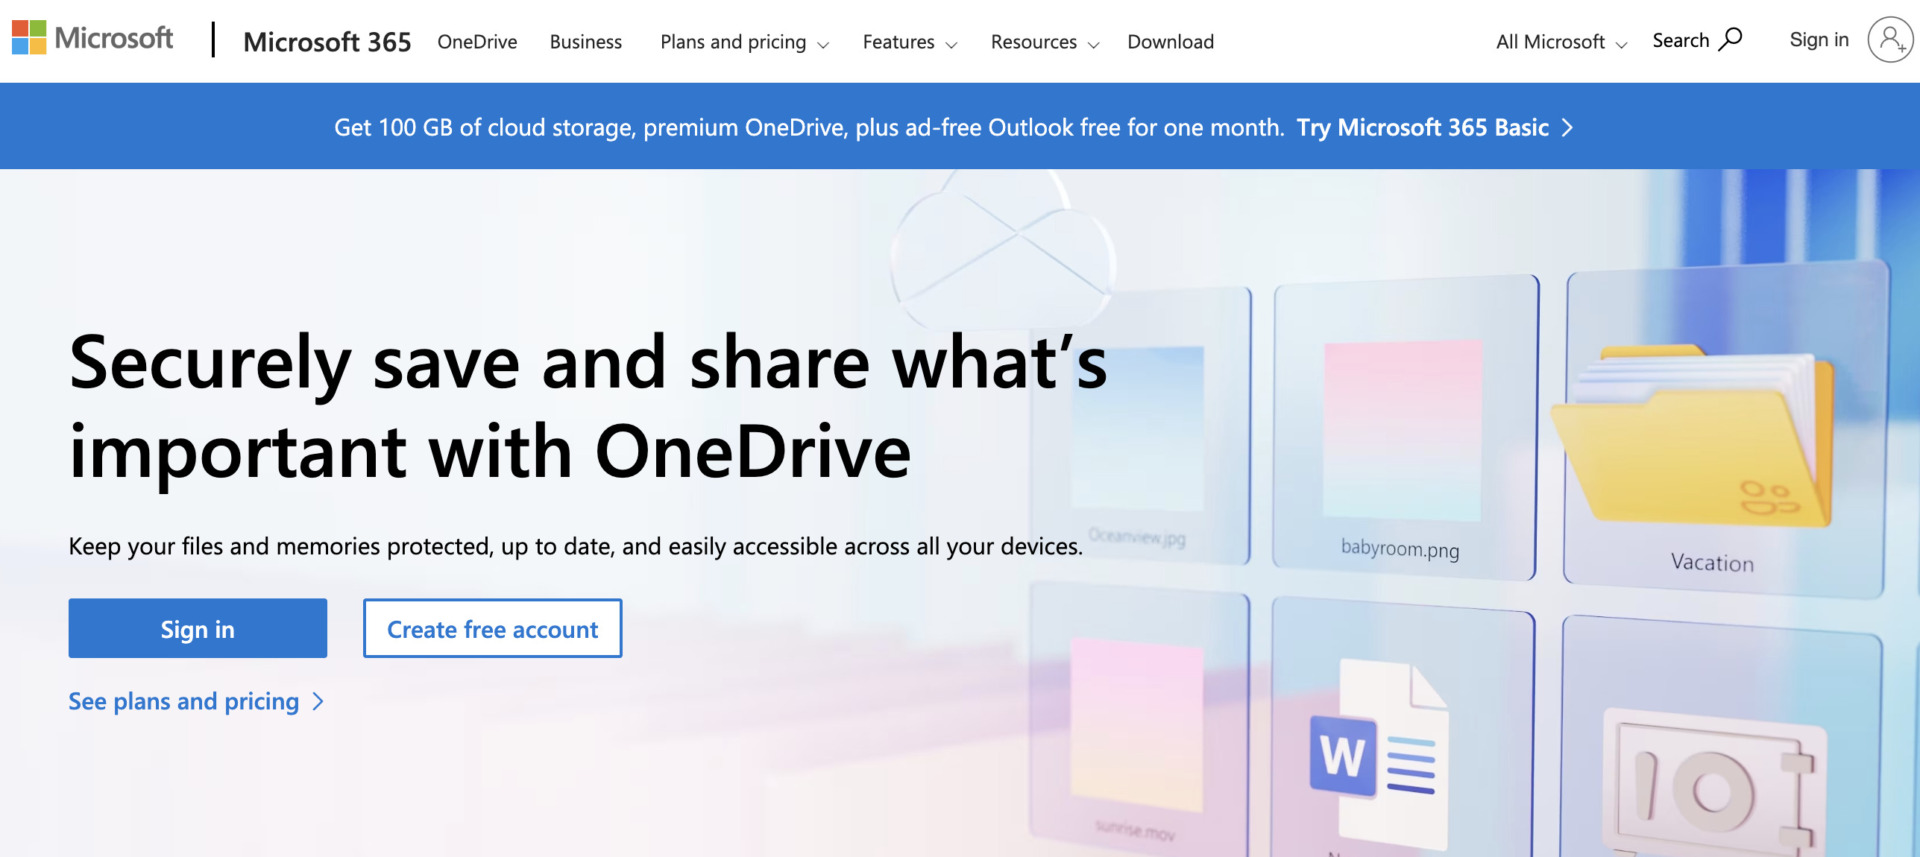 Top image of OneDrive